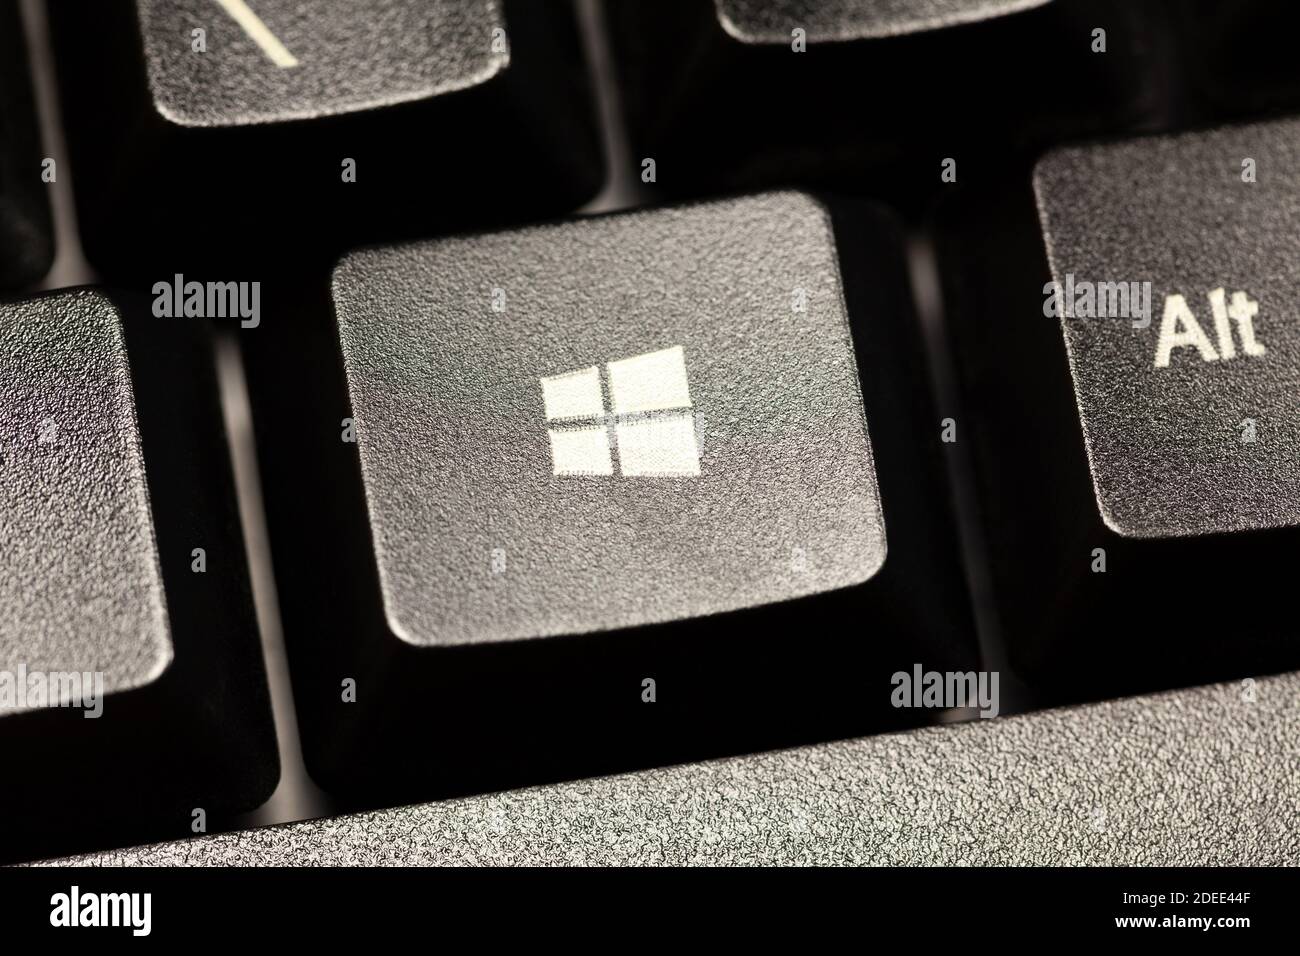 Microsoft Windows 10 operating system logo key on a black desktop computer keyboard seen from up close. PC OS button macro, extreme closeup, simple to Stock Photo